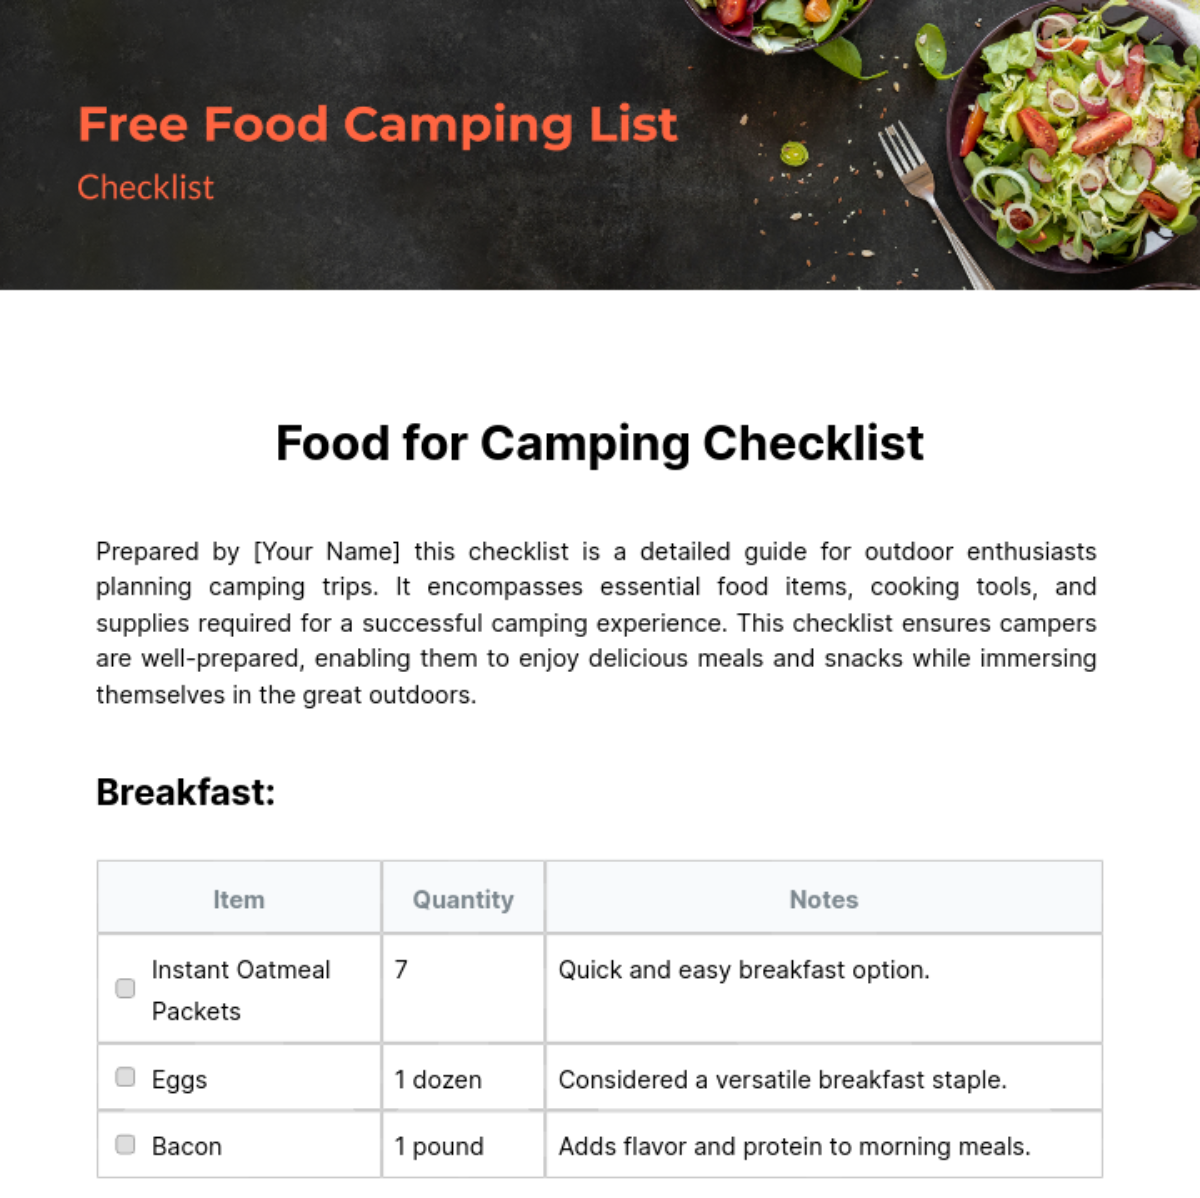 Free Food Camping List Checklist Template